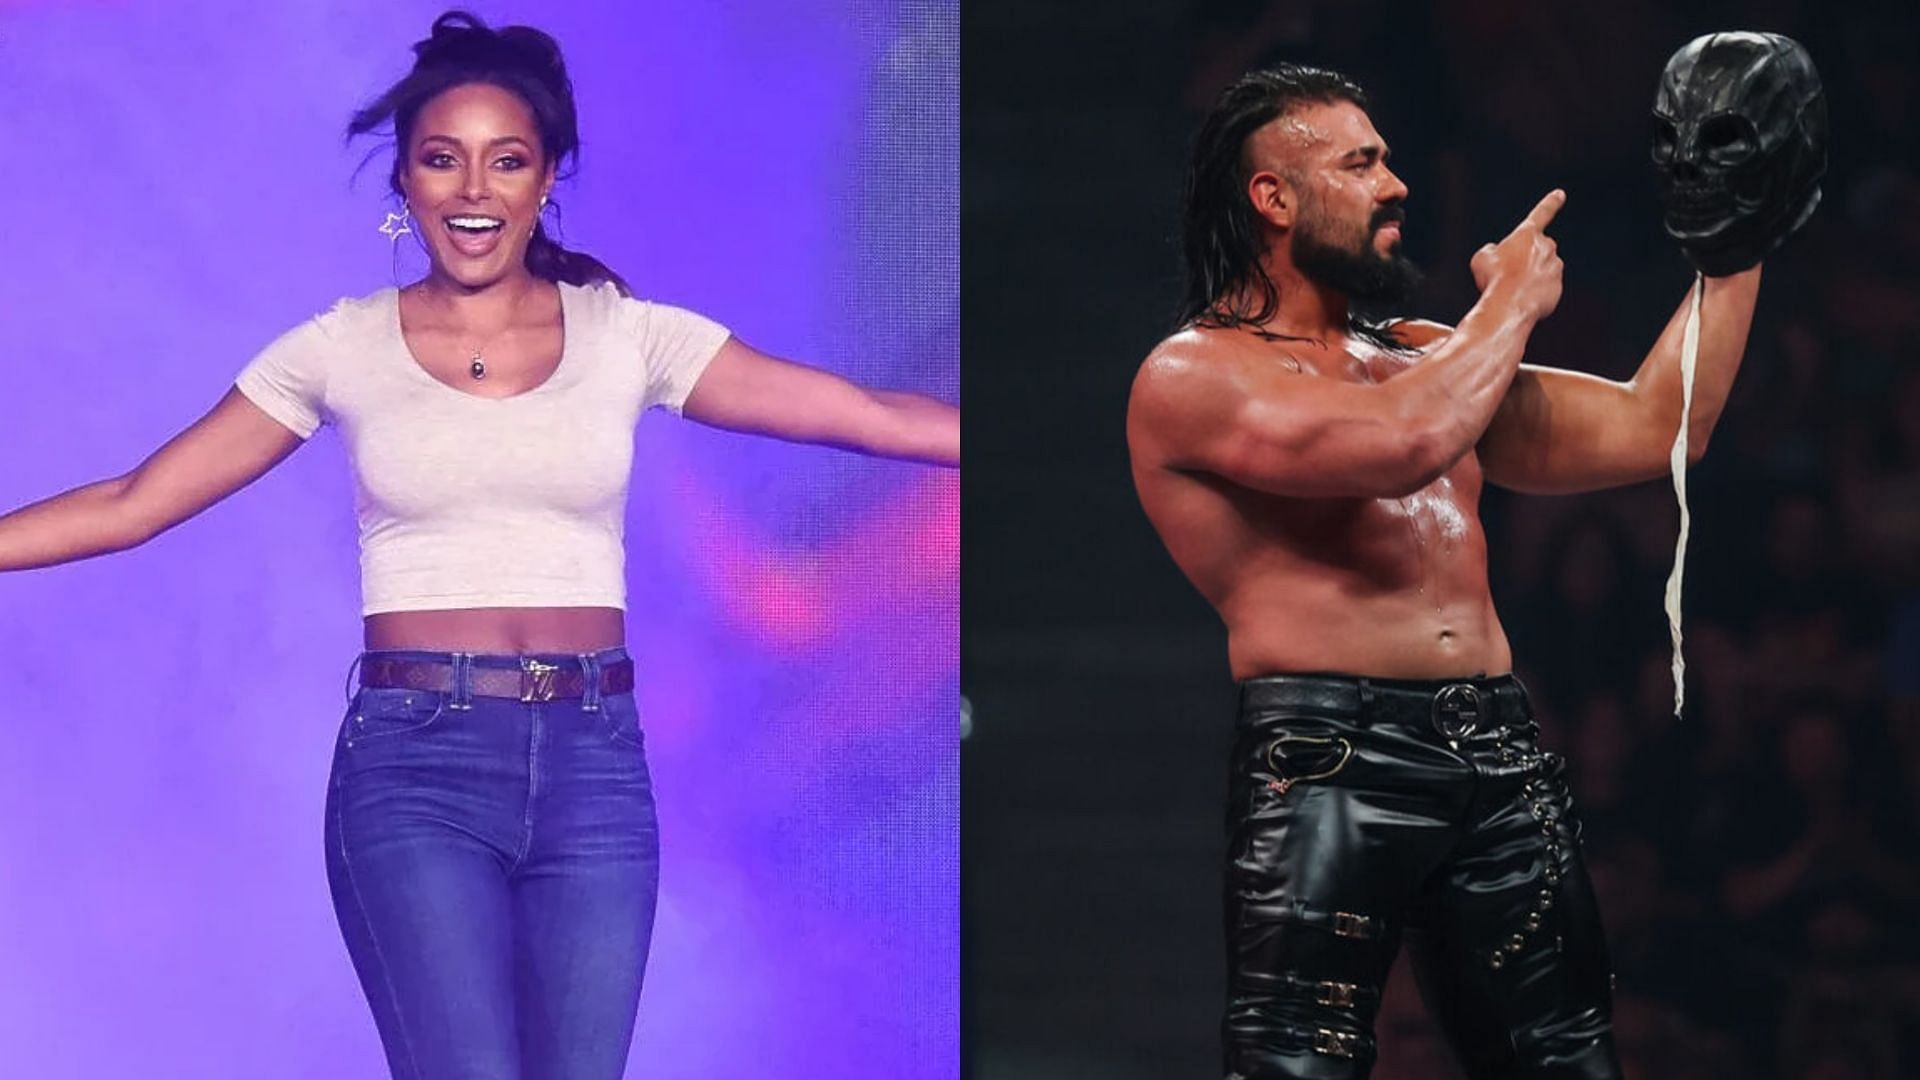 How many fans still remember these long-forgotten AEW storylines?